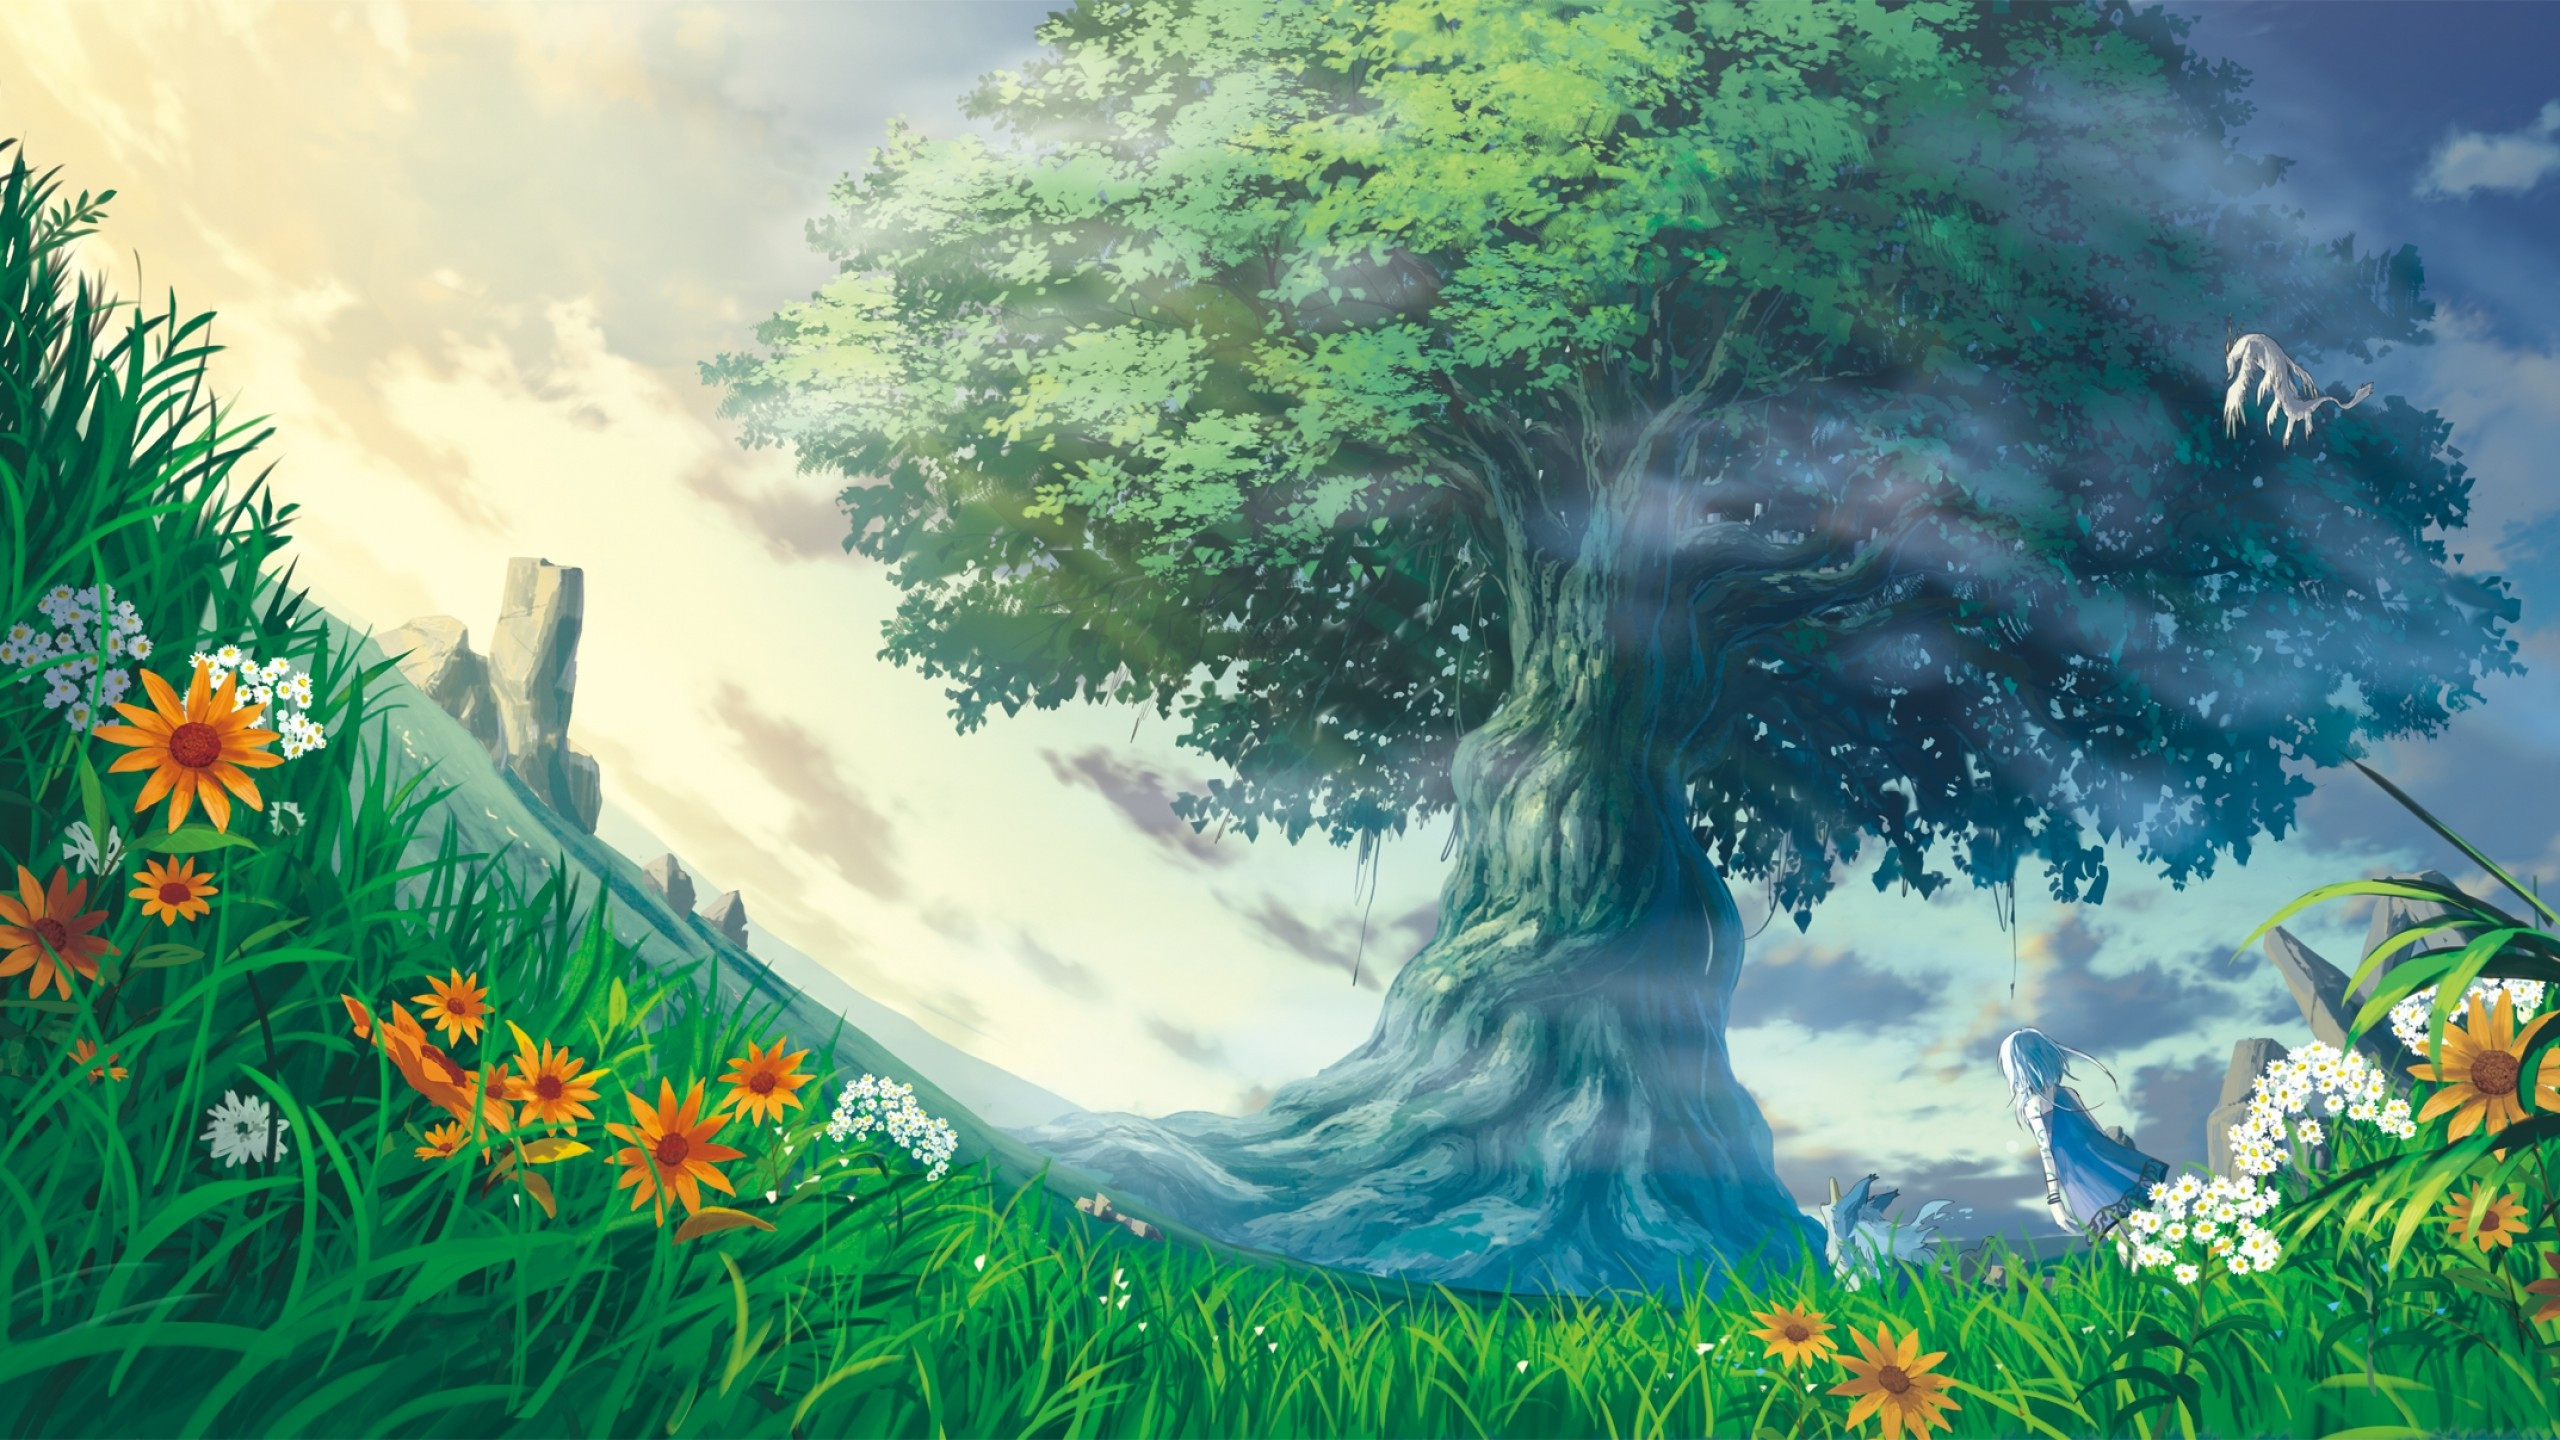 Download 2560x1440 Anime Landscape, Anime Girl, Tree, Flowers, Grass, Worm View Wallpaper for iMac 27 inch